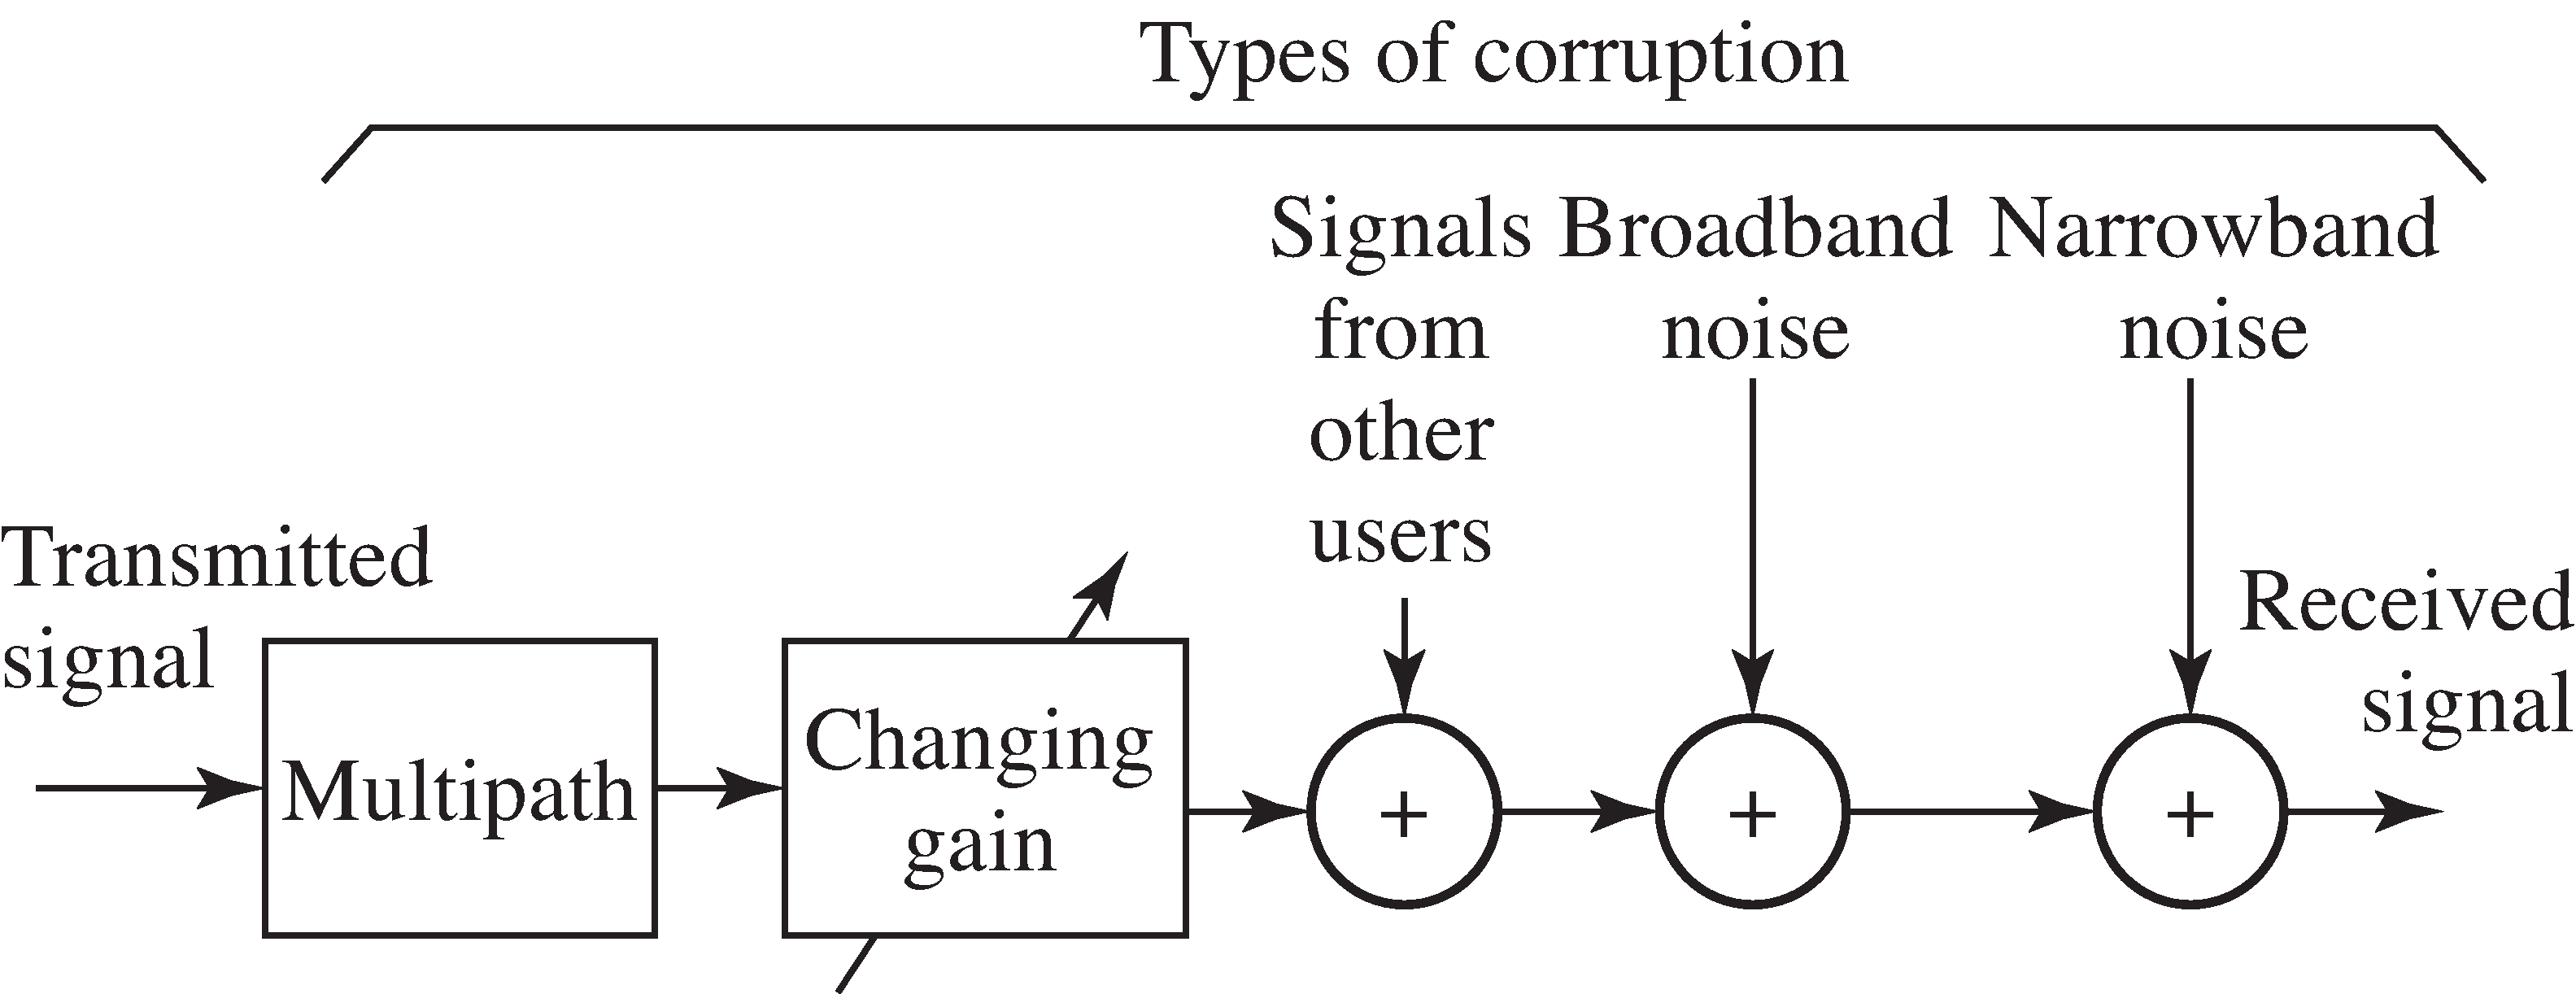 Sources of corruption include multipath interference, changing channel gains, interference from other users, broadband noise, and narrowband interferences.